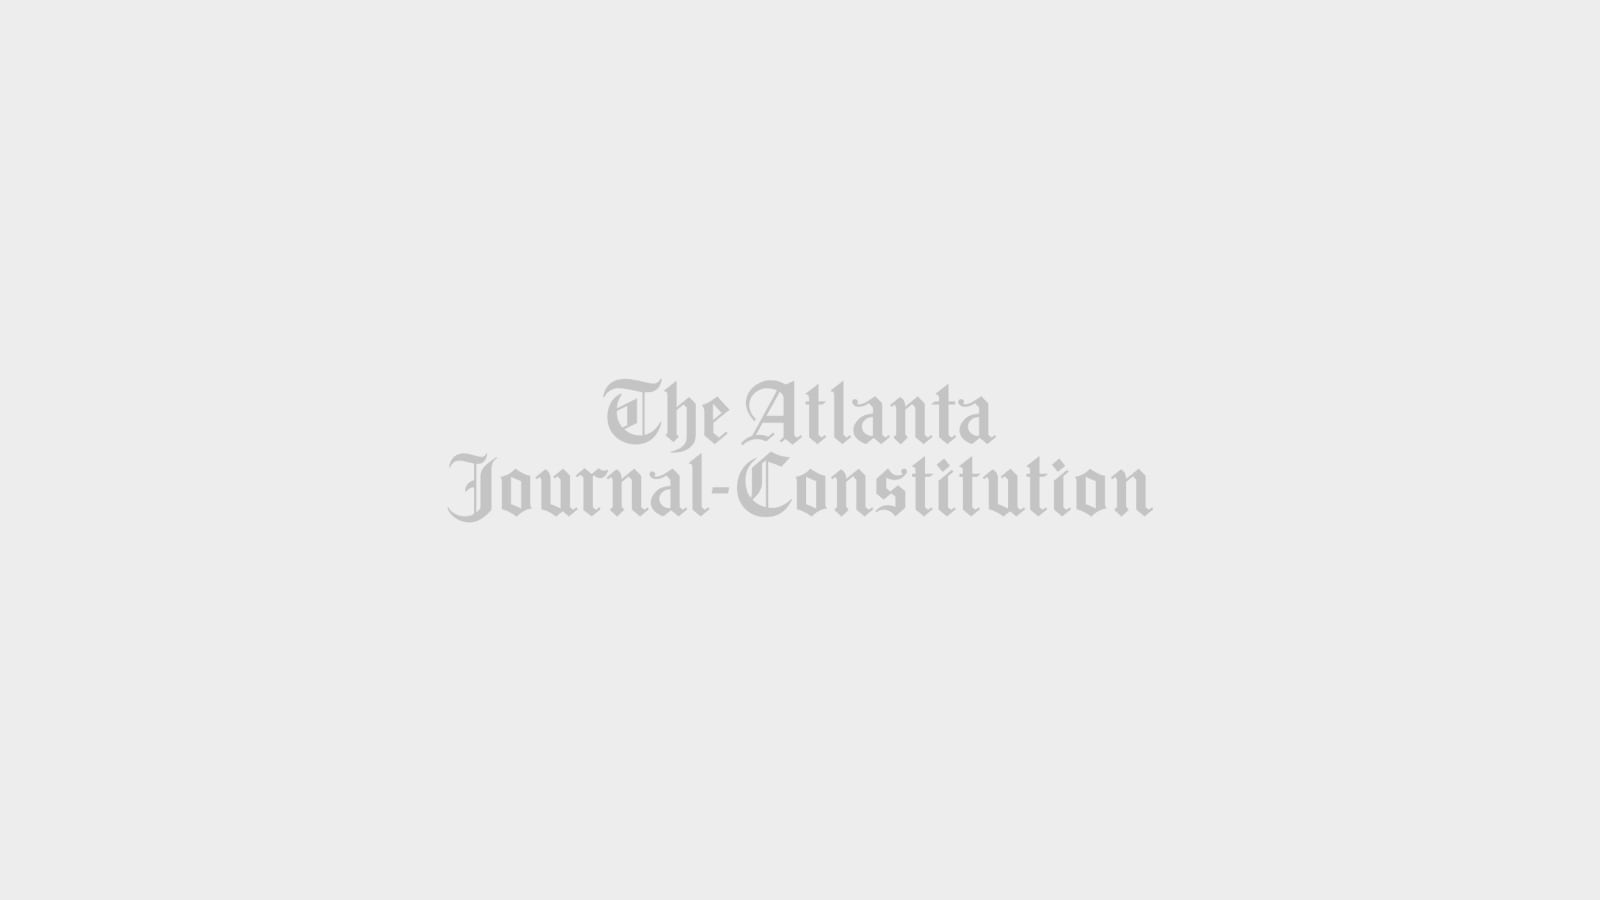 Trees Atlanta has said it will conditionally support a new Tree Protection Ordinance proposed by the City of Atlanta as long as the amendments that Trees Atlanta has submitted are incorporated into the final ordinance. Absent the majority of amendments being accepted, Trees Atlanta's conditional support must be withdrawn, said officials.